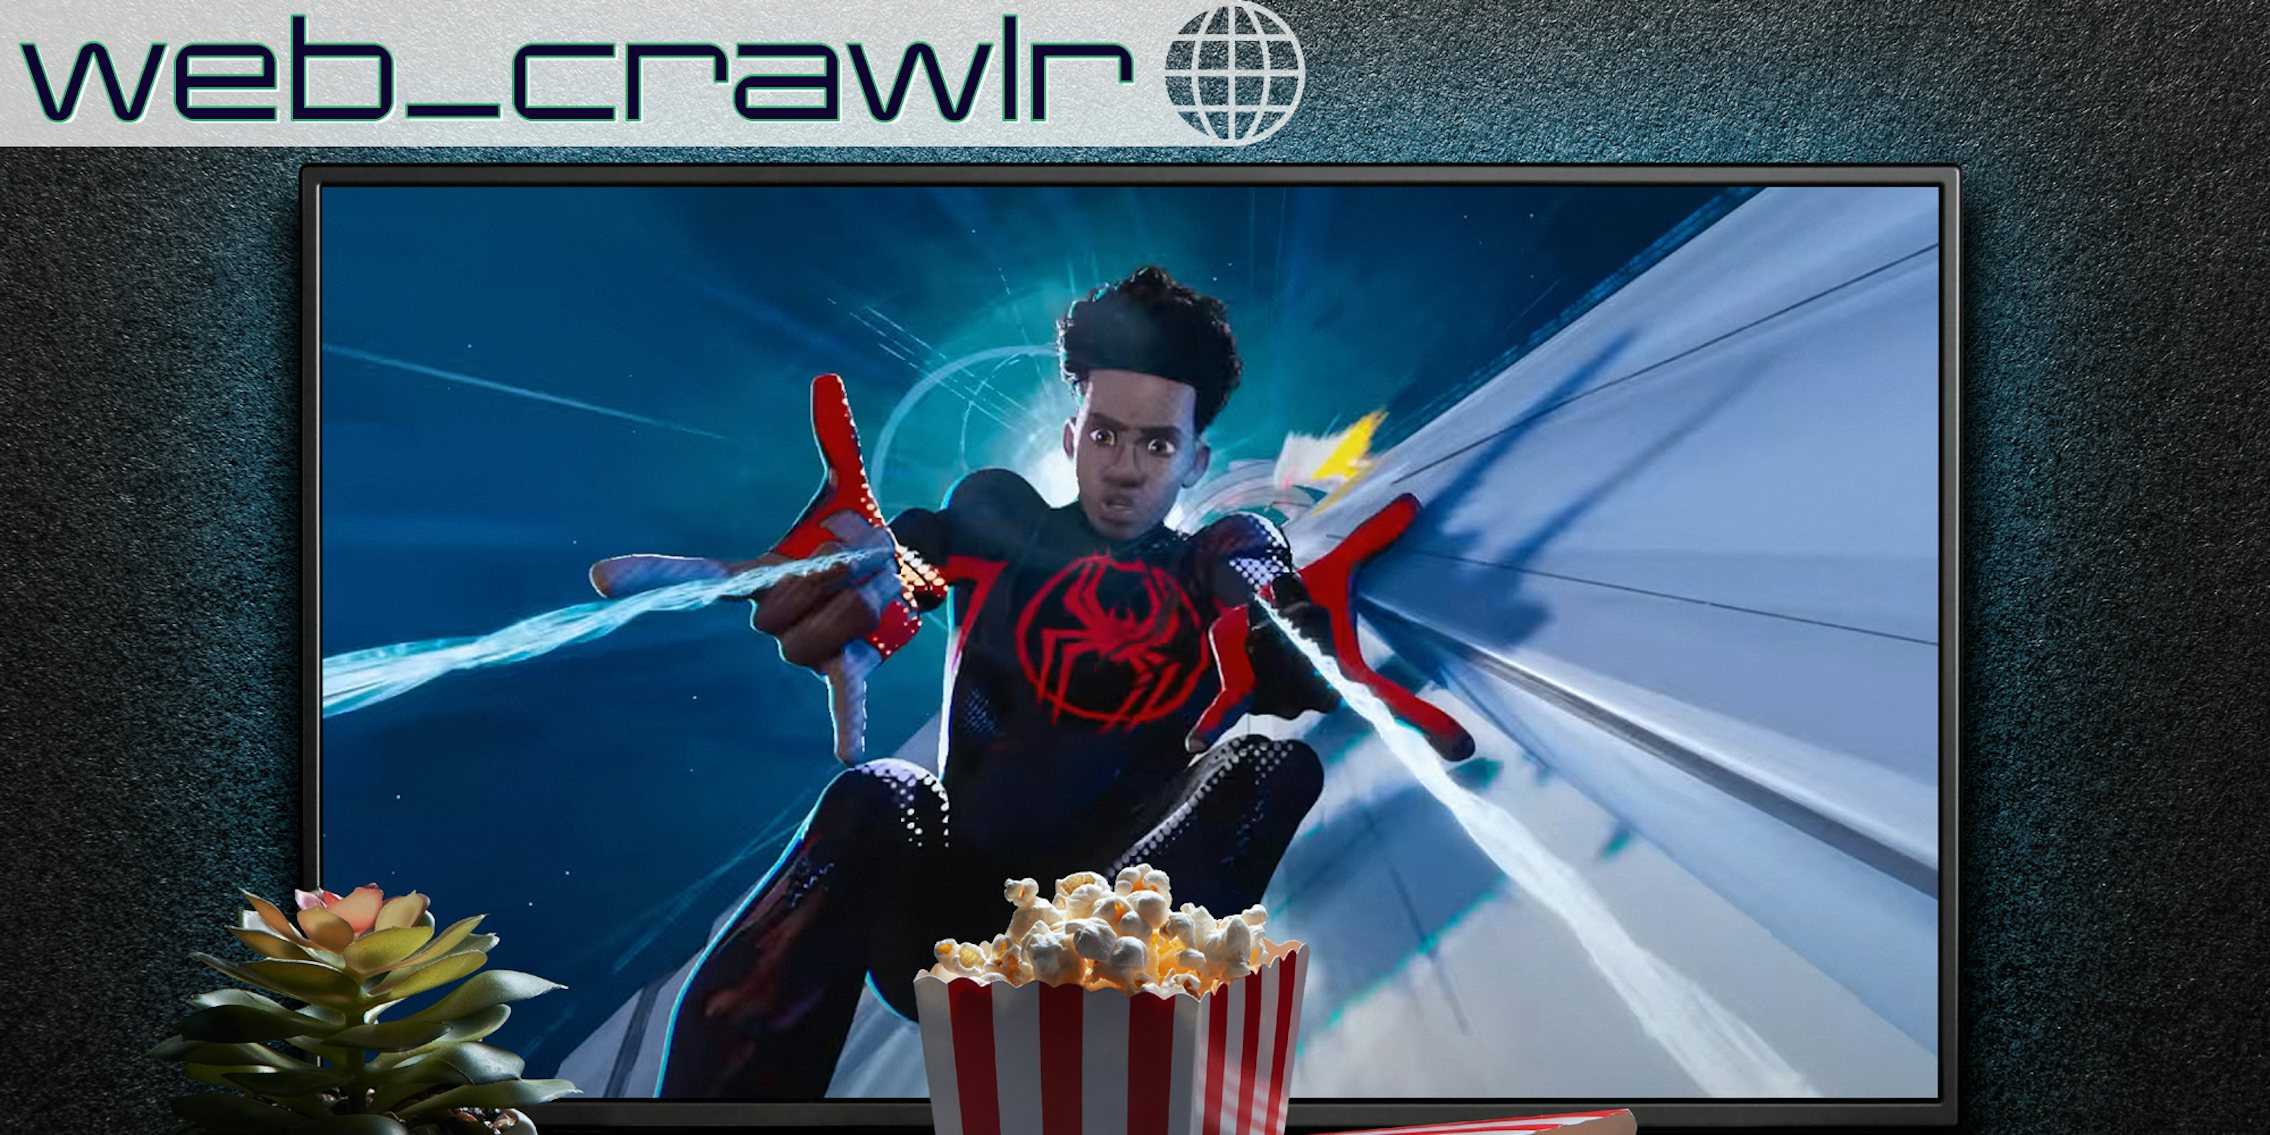 TV screen playing Spider-Man Across the Spider-Verse trailer or movie. The Daily Dot newsletter web_crawlr logo is in the top left corner.